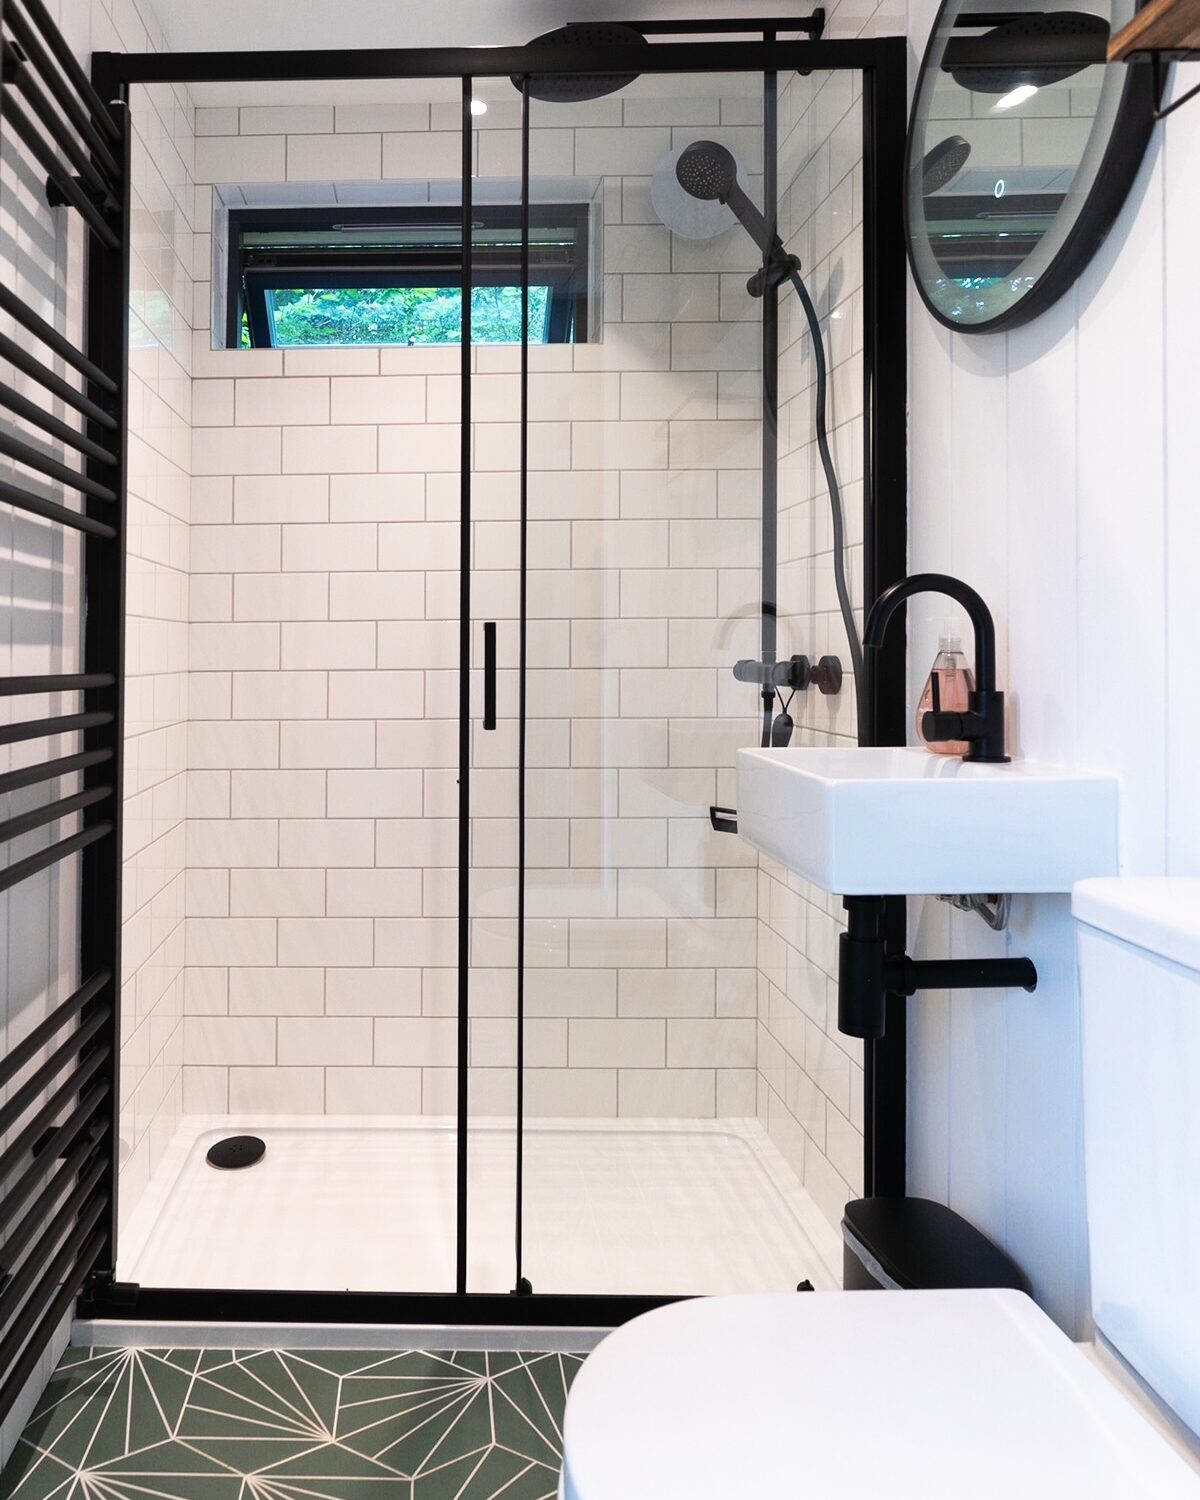 Shower room with Mandarin Stone Pod Green Tiles in this self contained holiday Dart cabin _ Life Space Cabins.JPG (1)